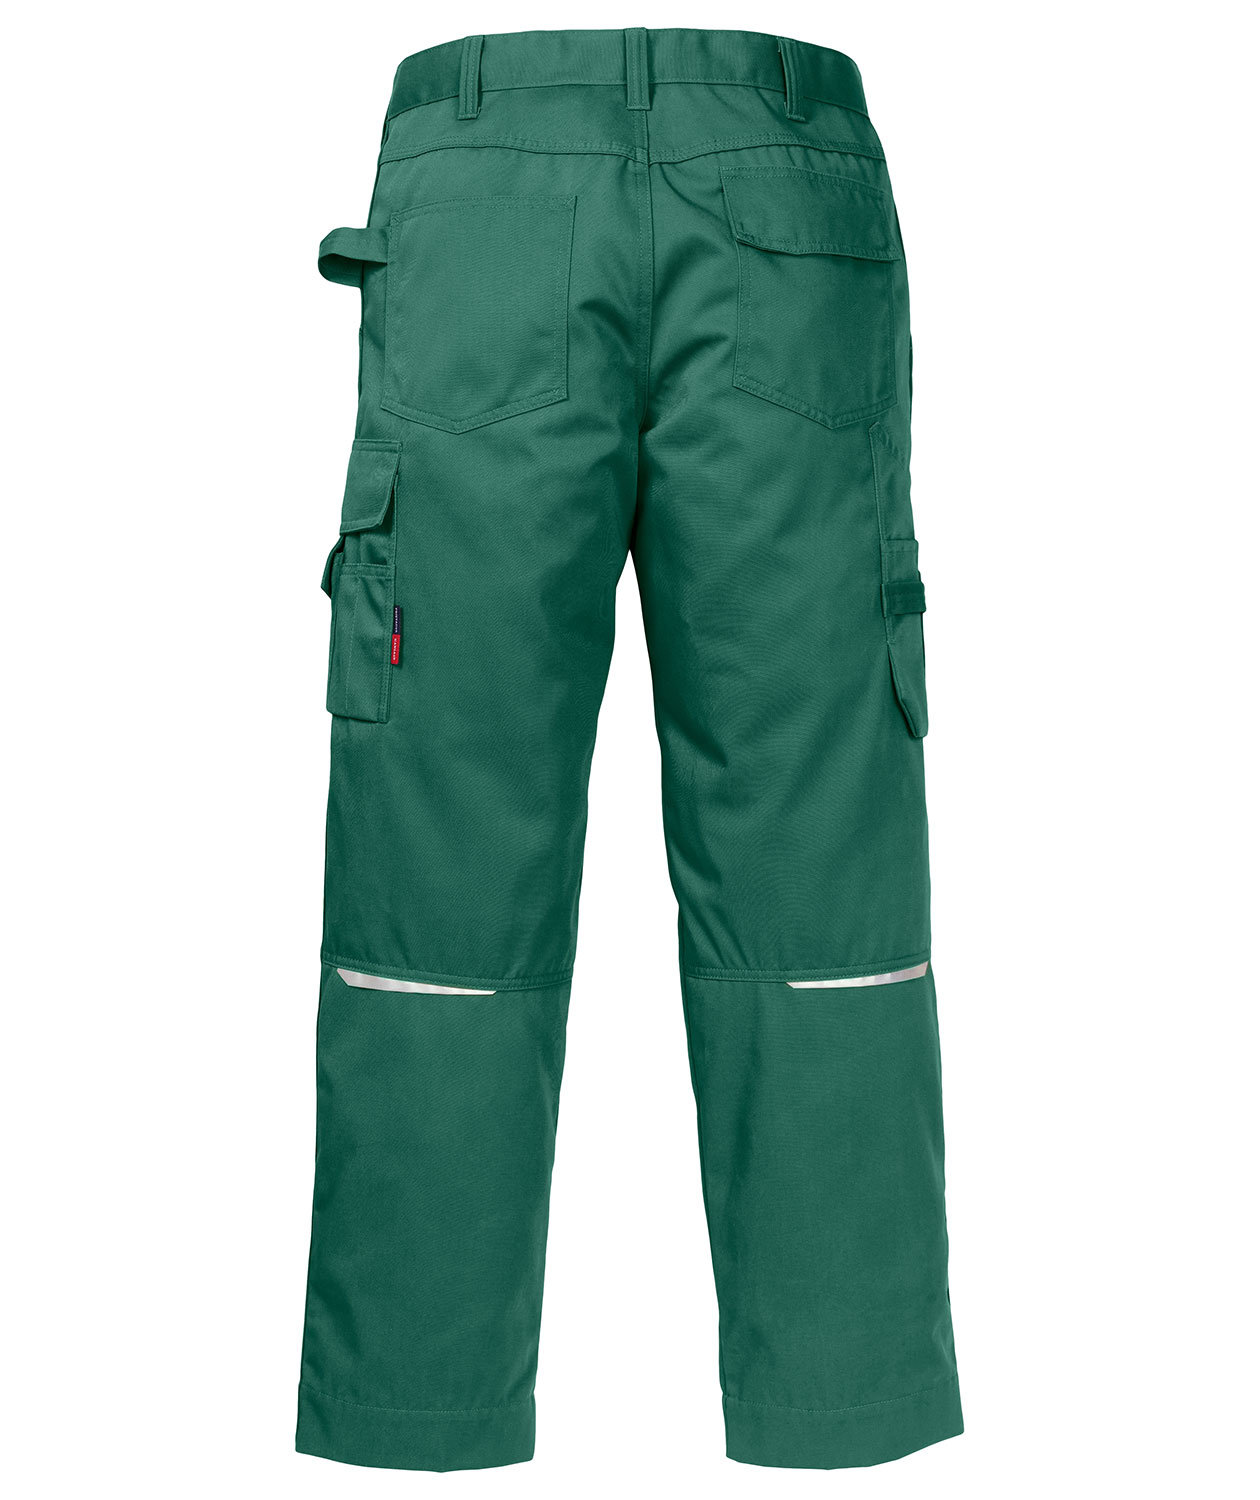 Dassy® Nashville Two-Tone Work Trouser For Painters | V4G Workwear